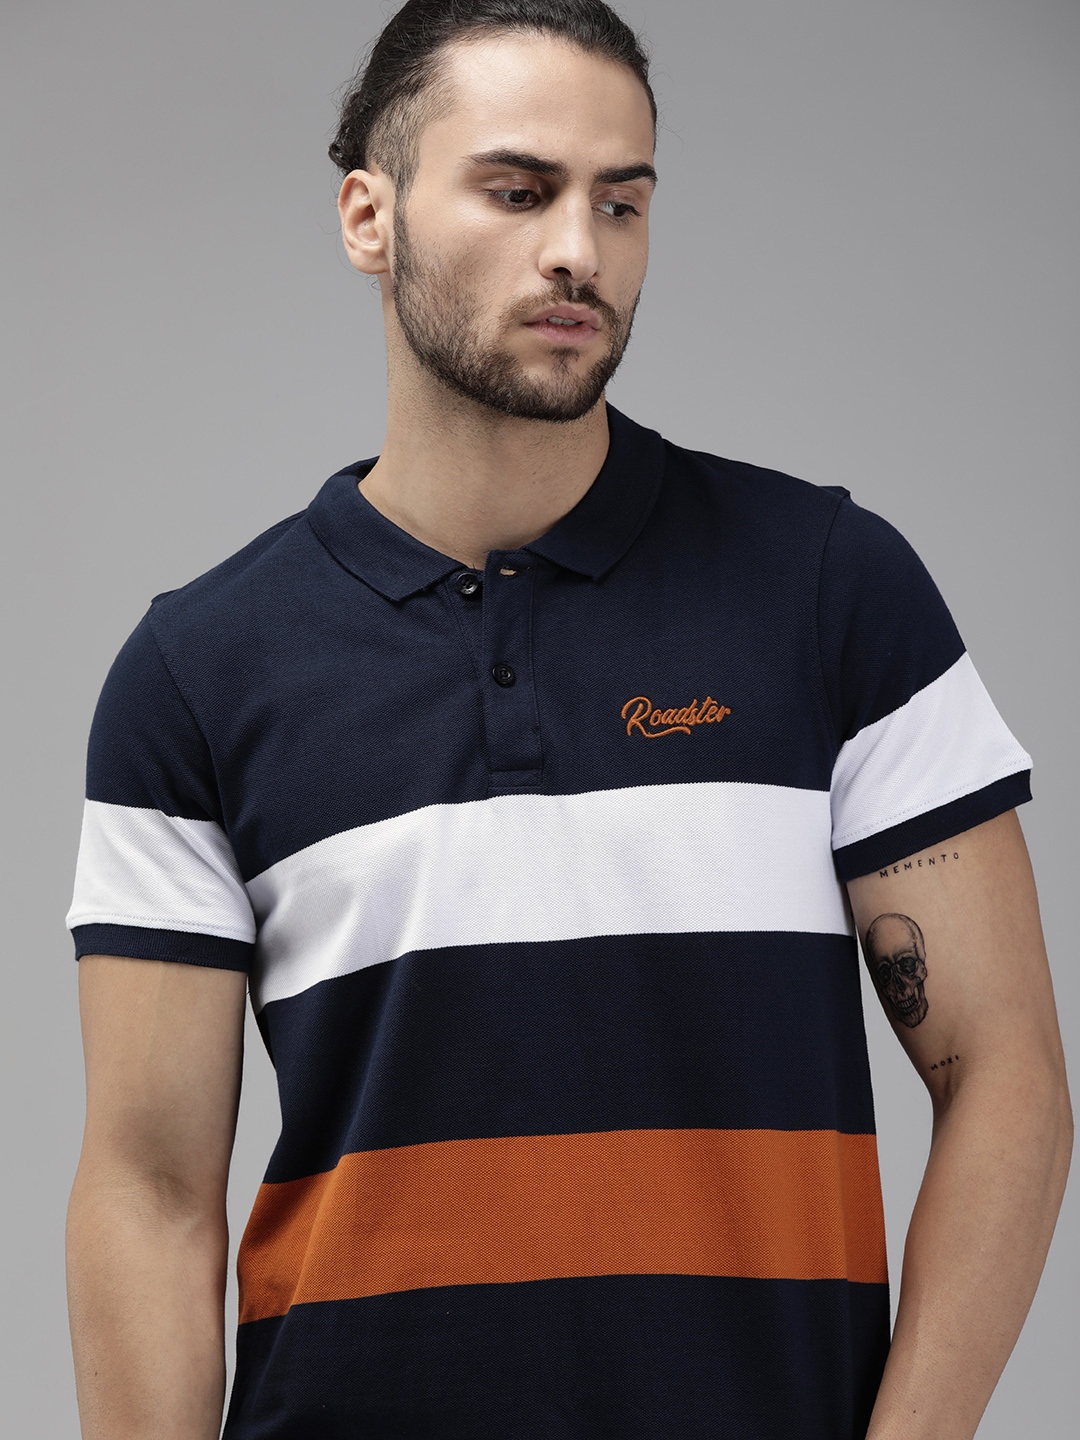 Buy Roadster Men Navy Blue White Striped Polo Collar Pure Cotton T ...